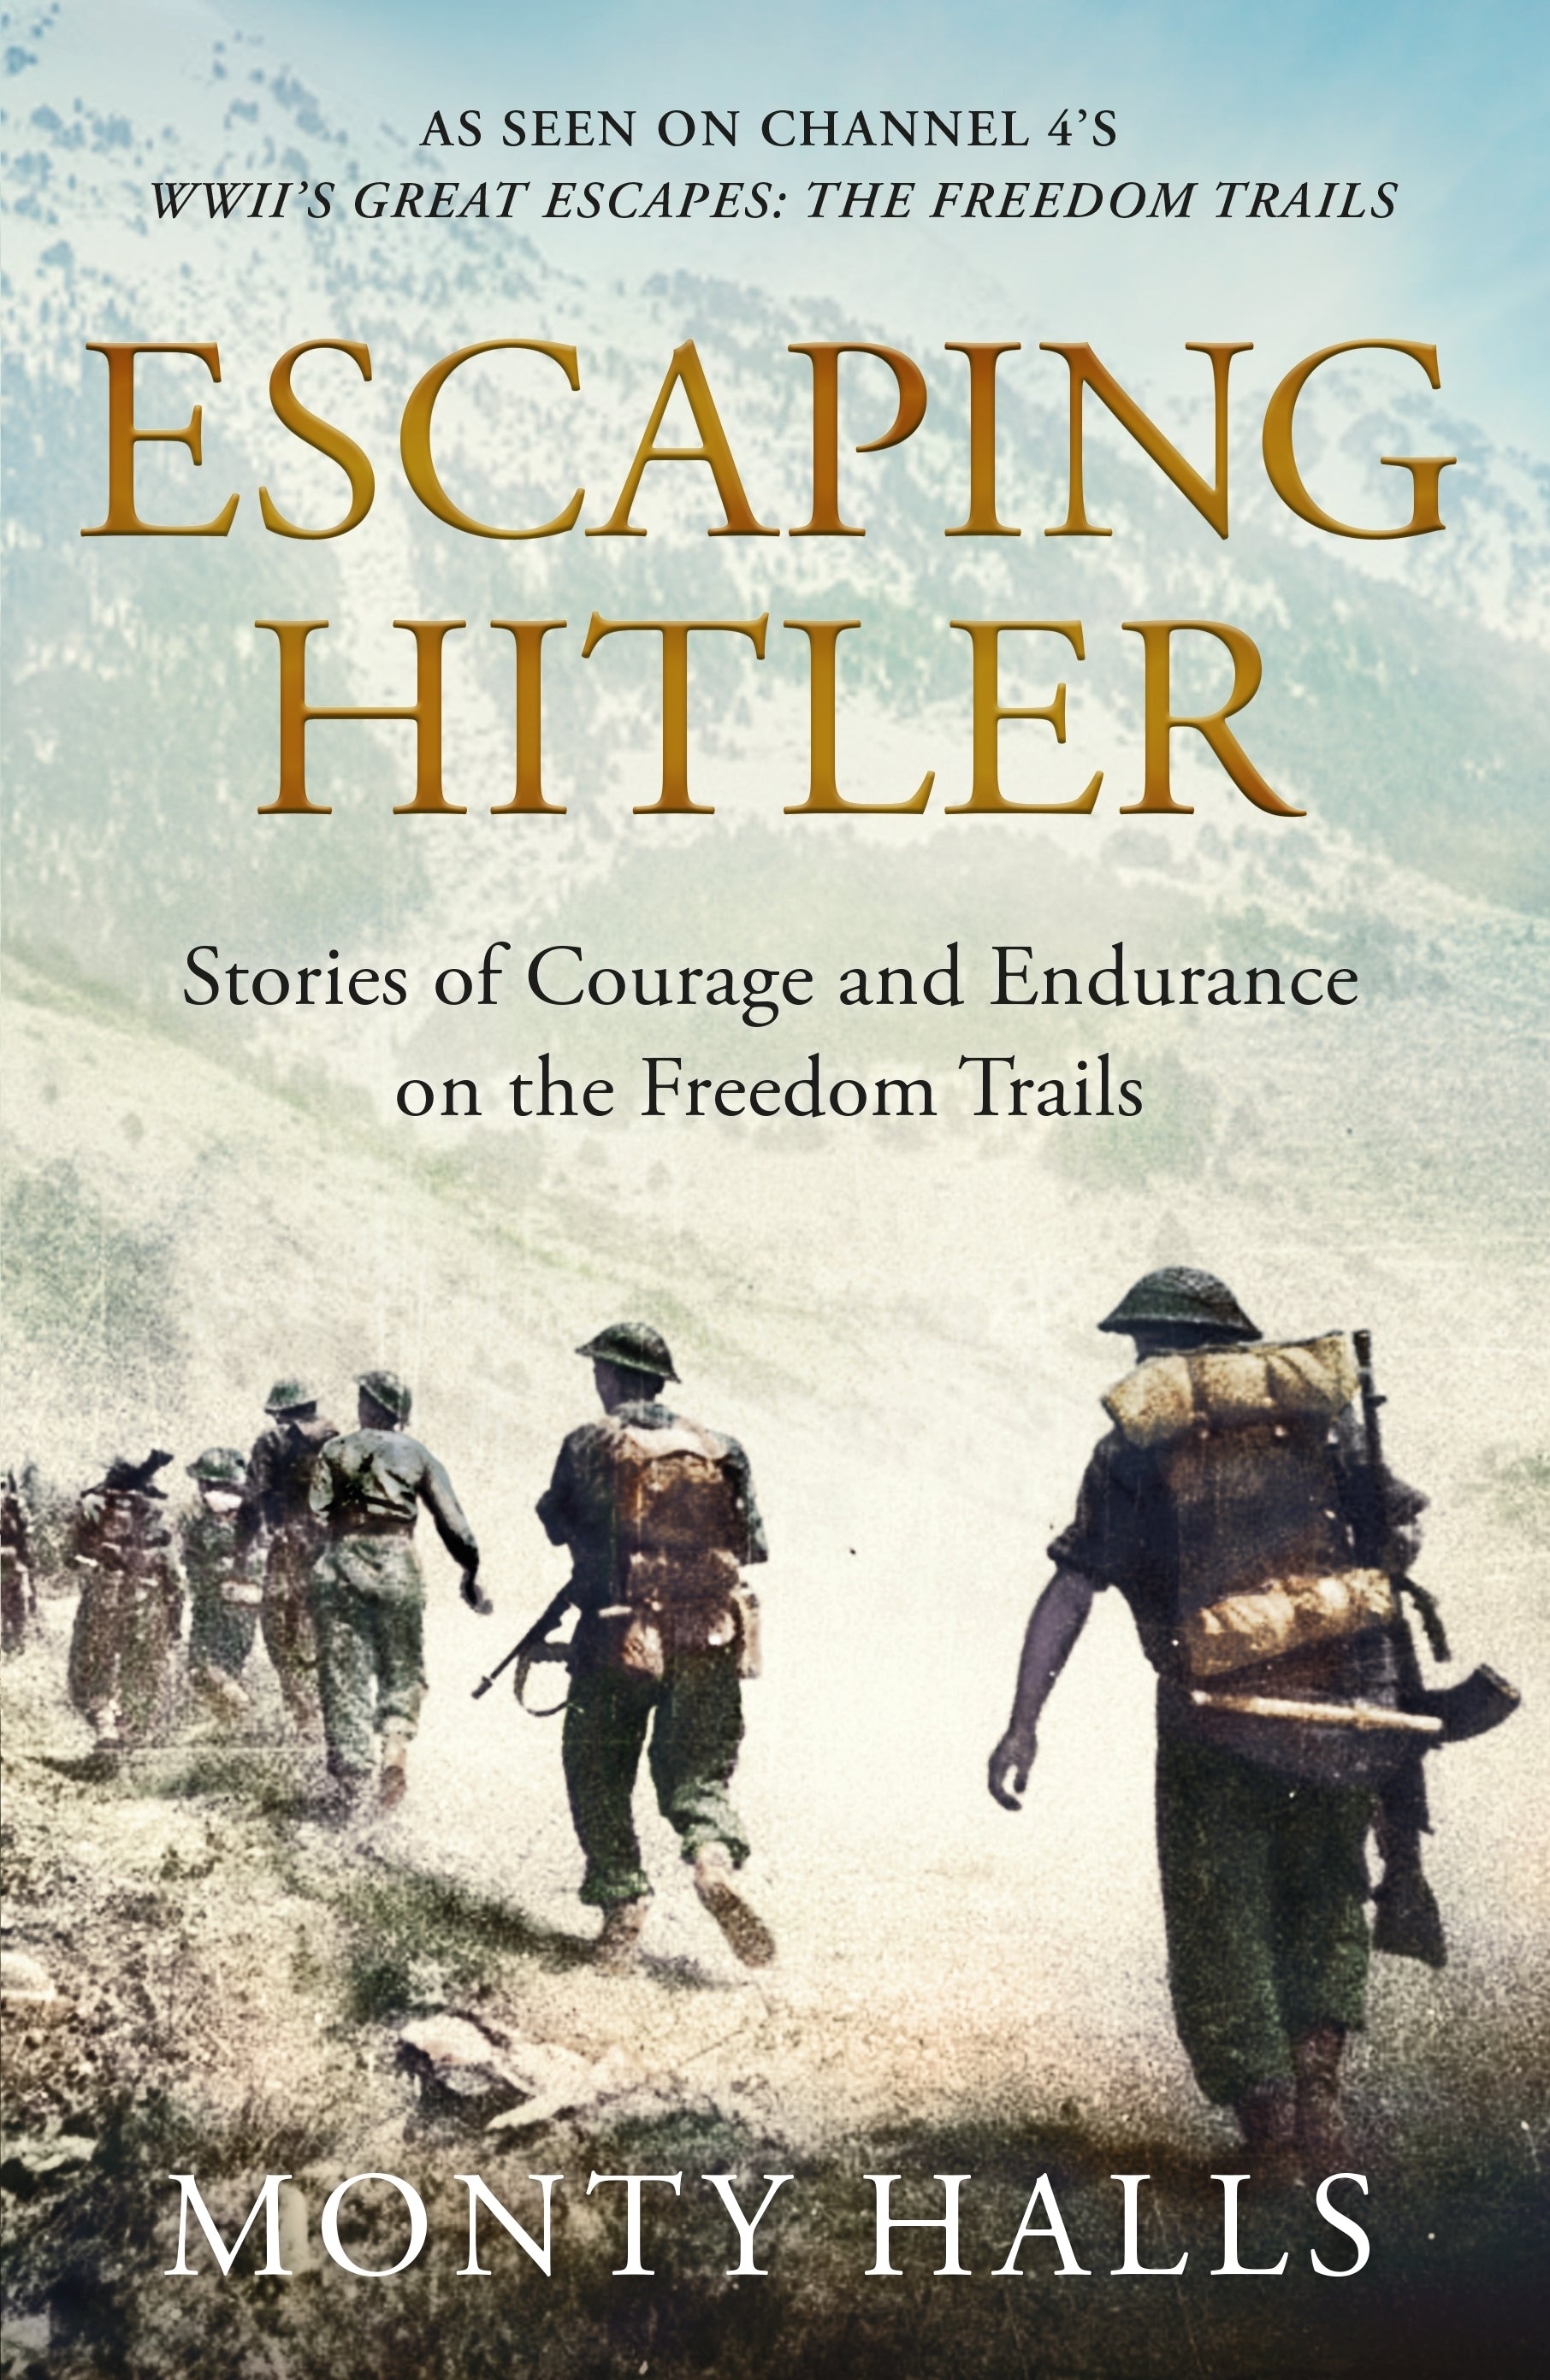 Escaping Hitler: Stories of Courage and Endurance on the Freedom Trails